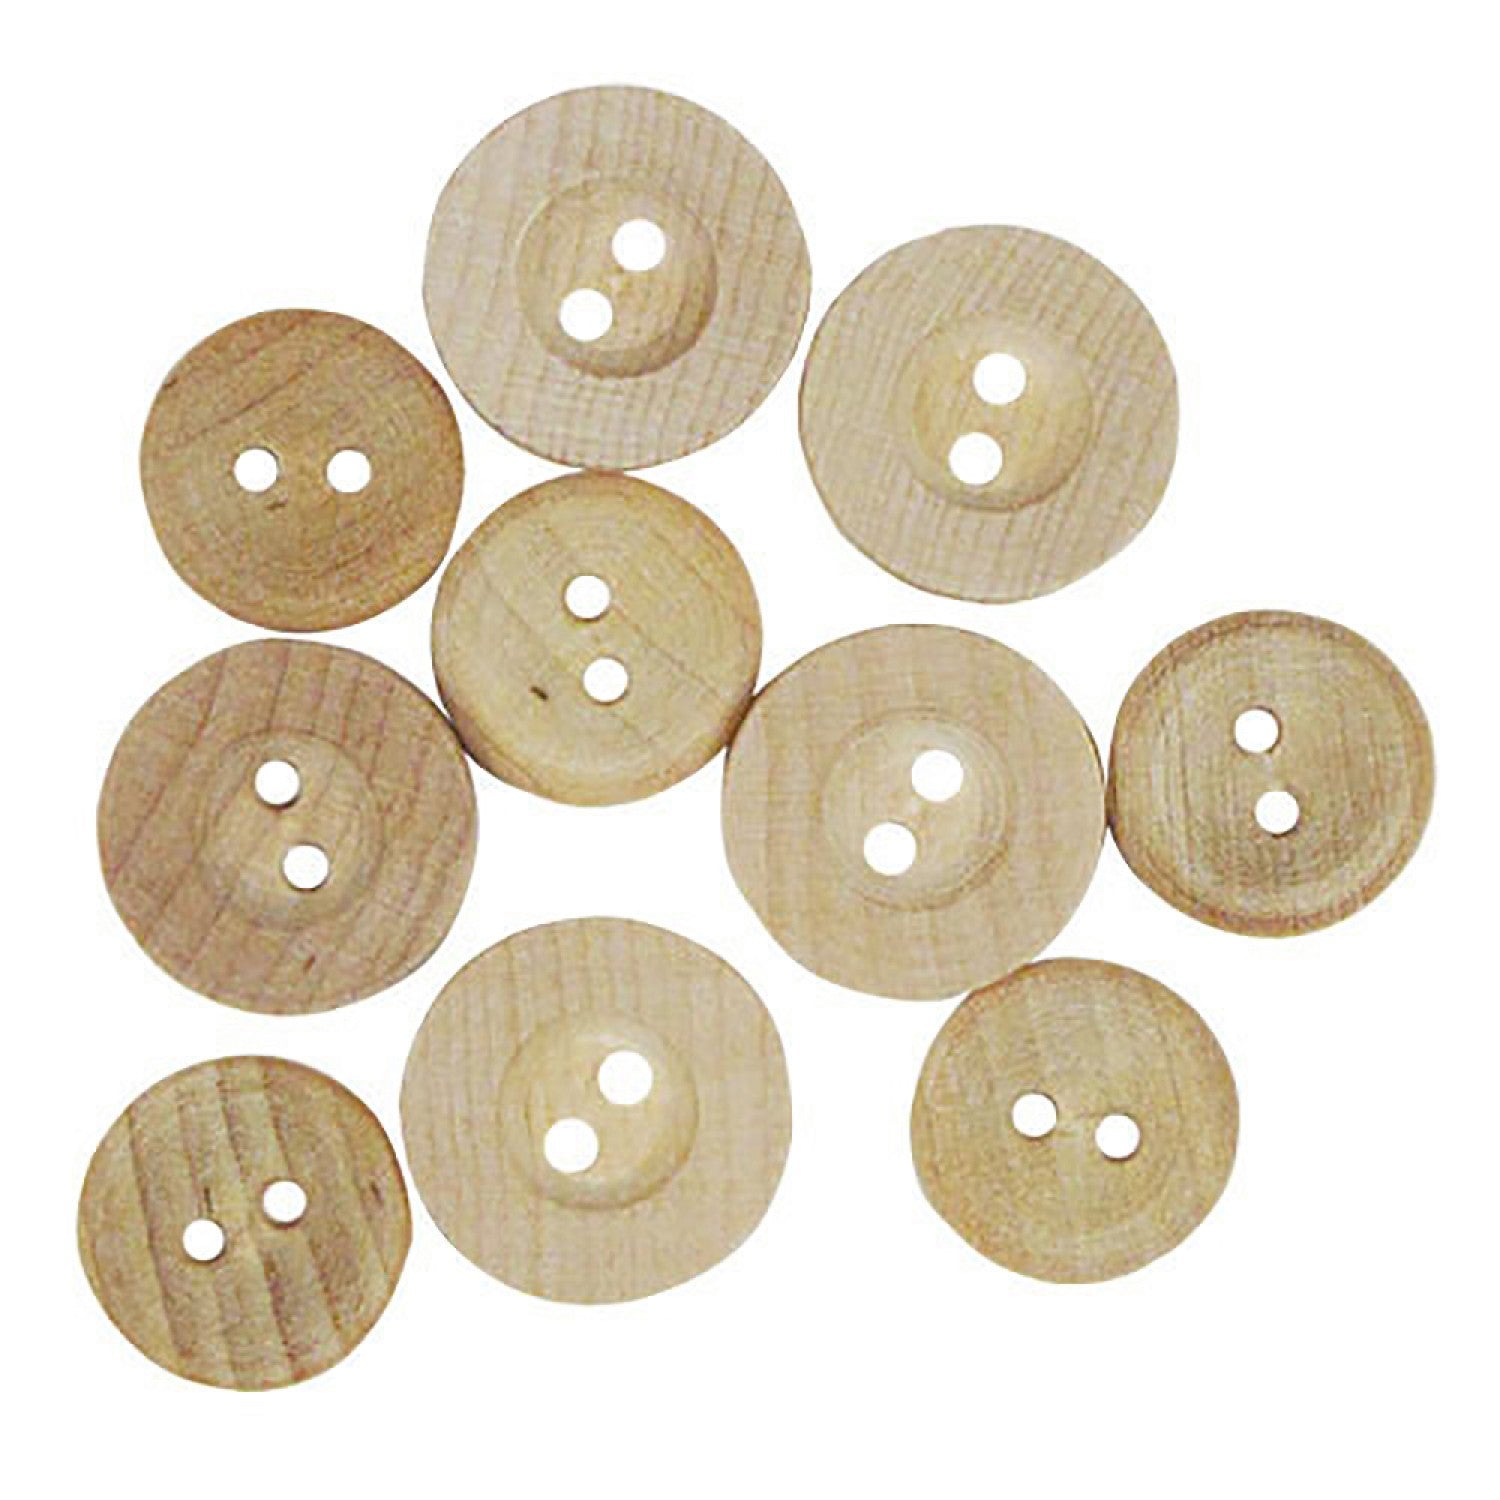 Wood Buttons - 9 Assorted Sizes